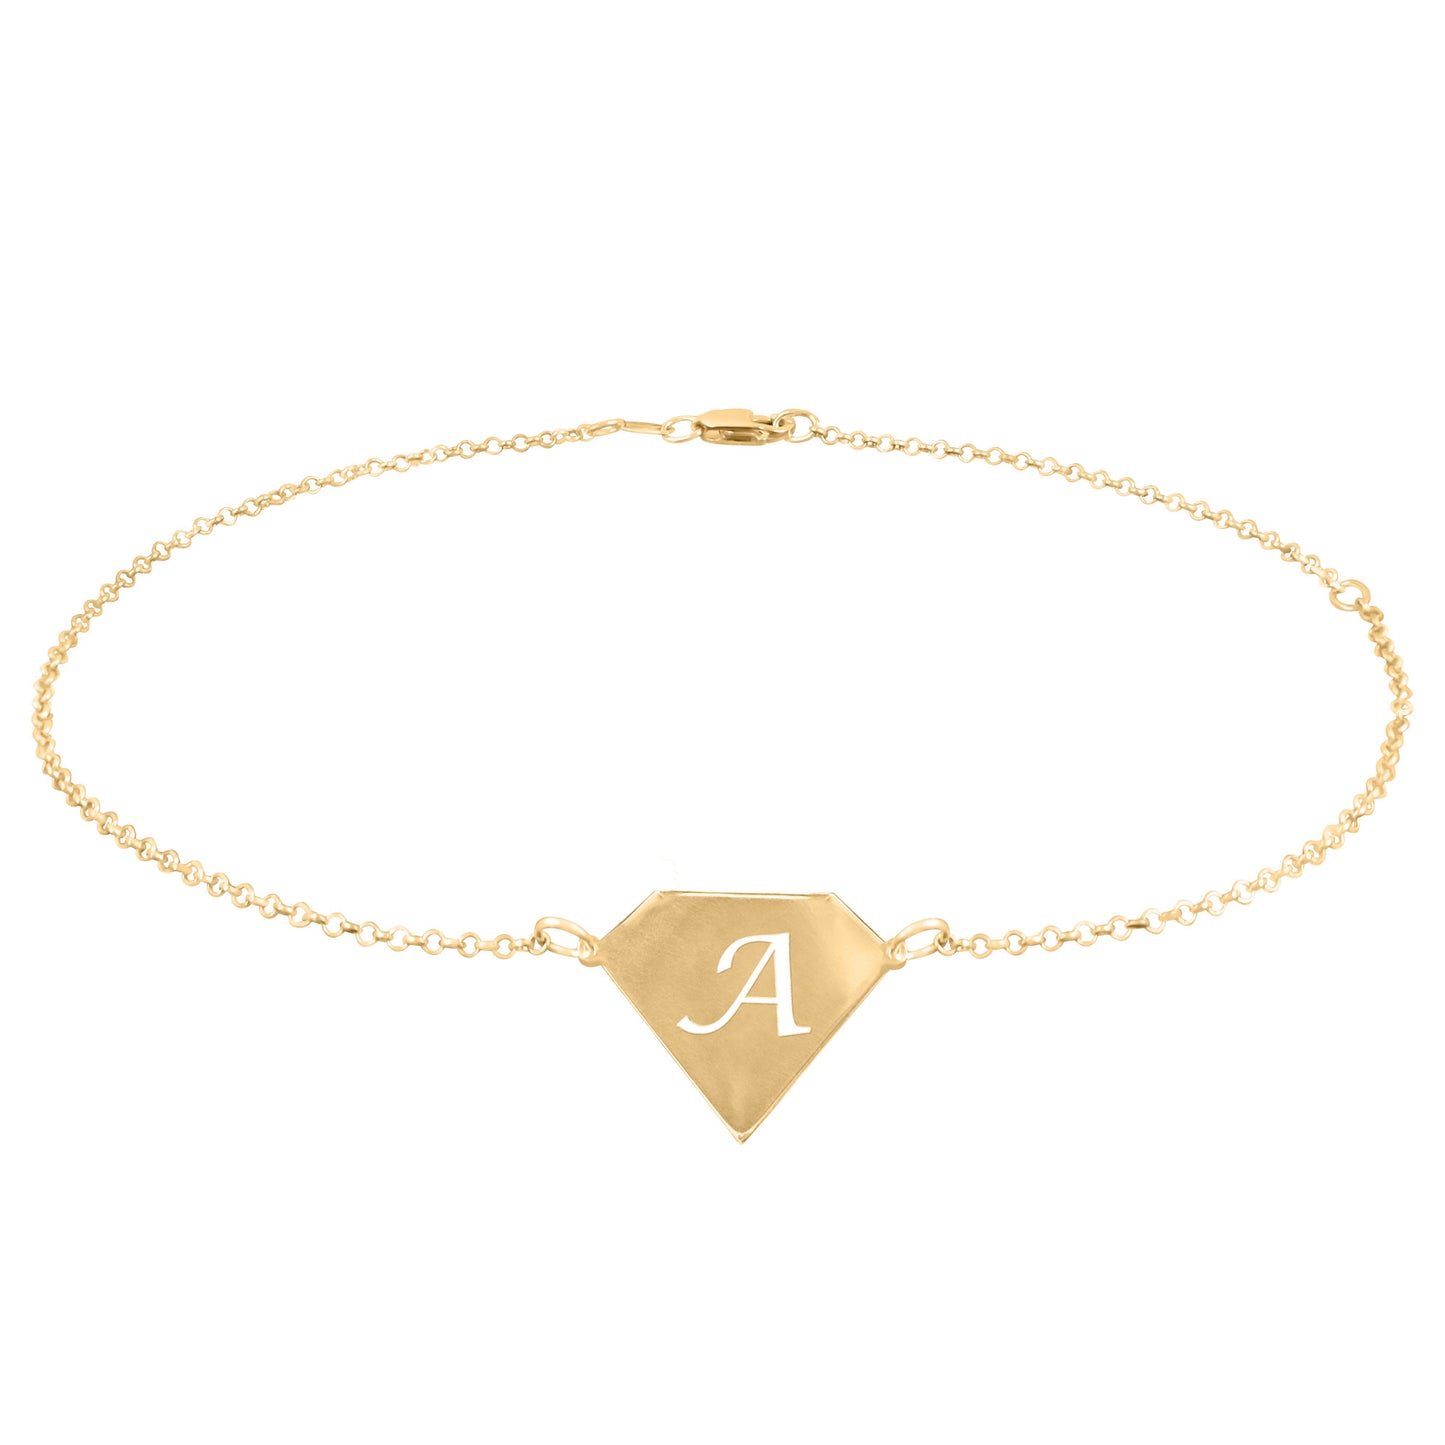 Diamond Shaped Initial Anklet In Sterling Silver or 14kt Rose or Yellow Gold Plating